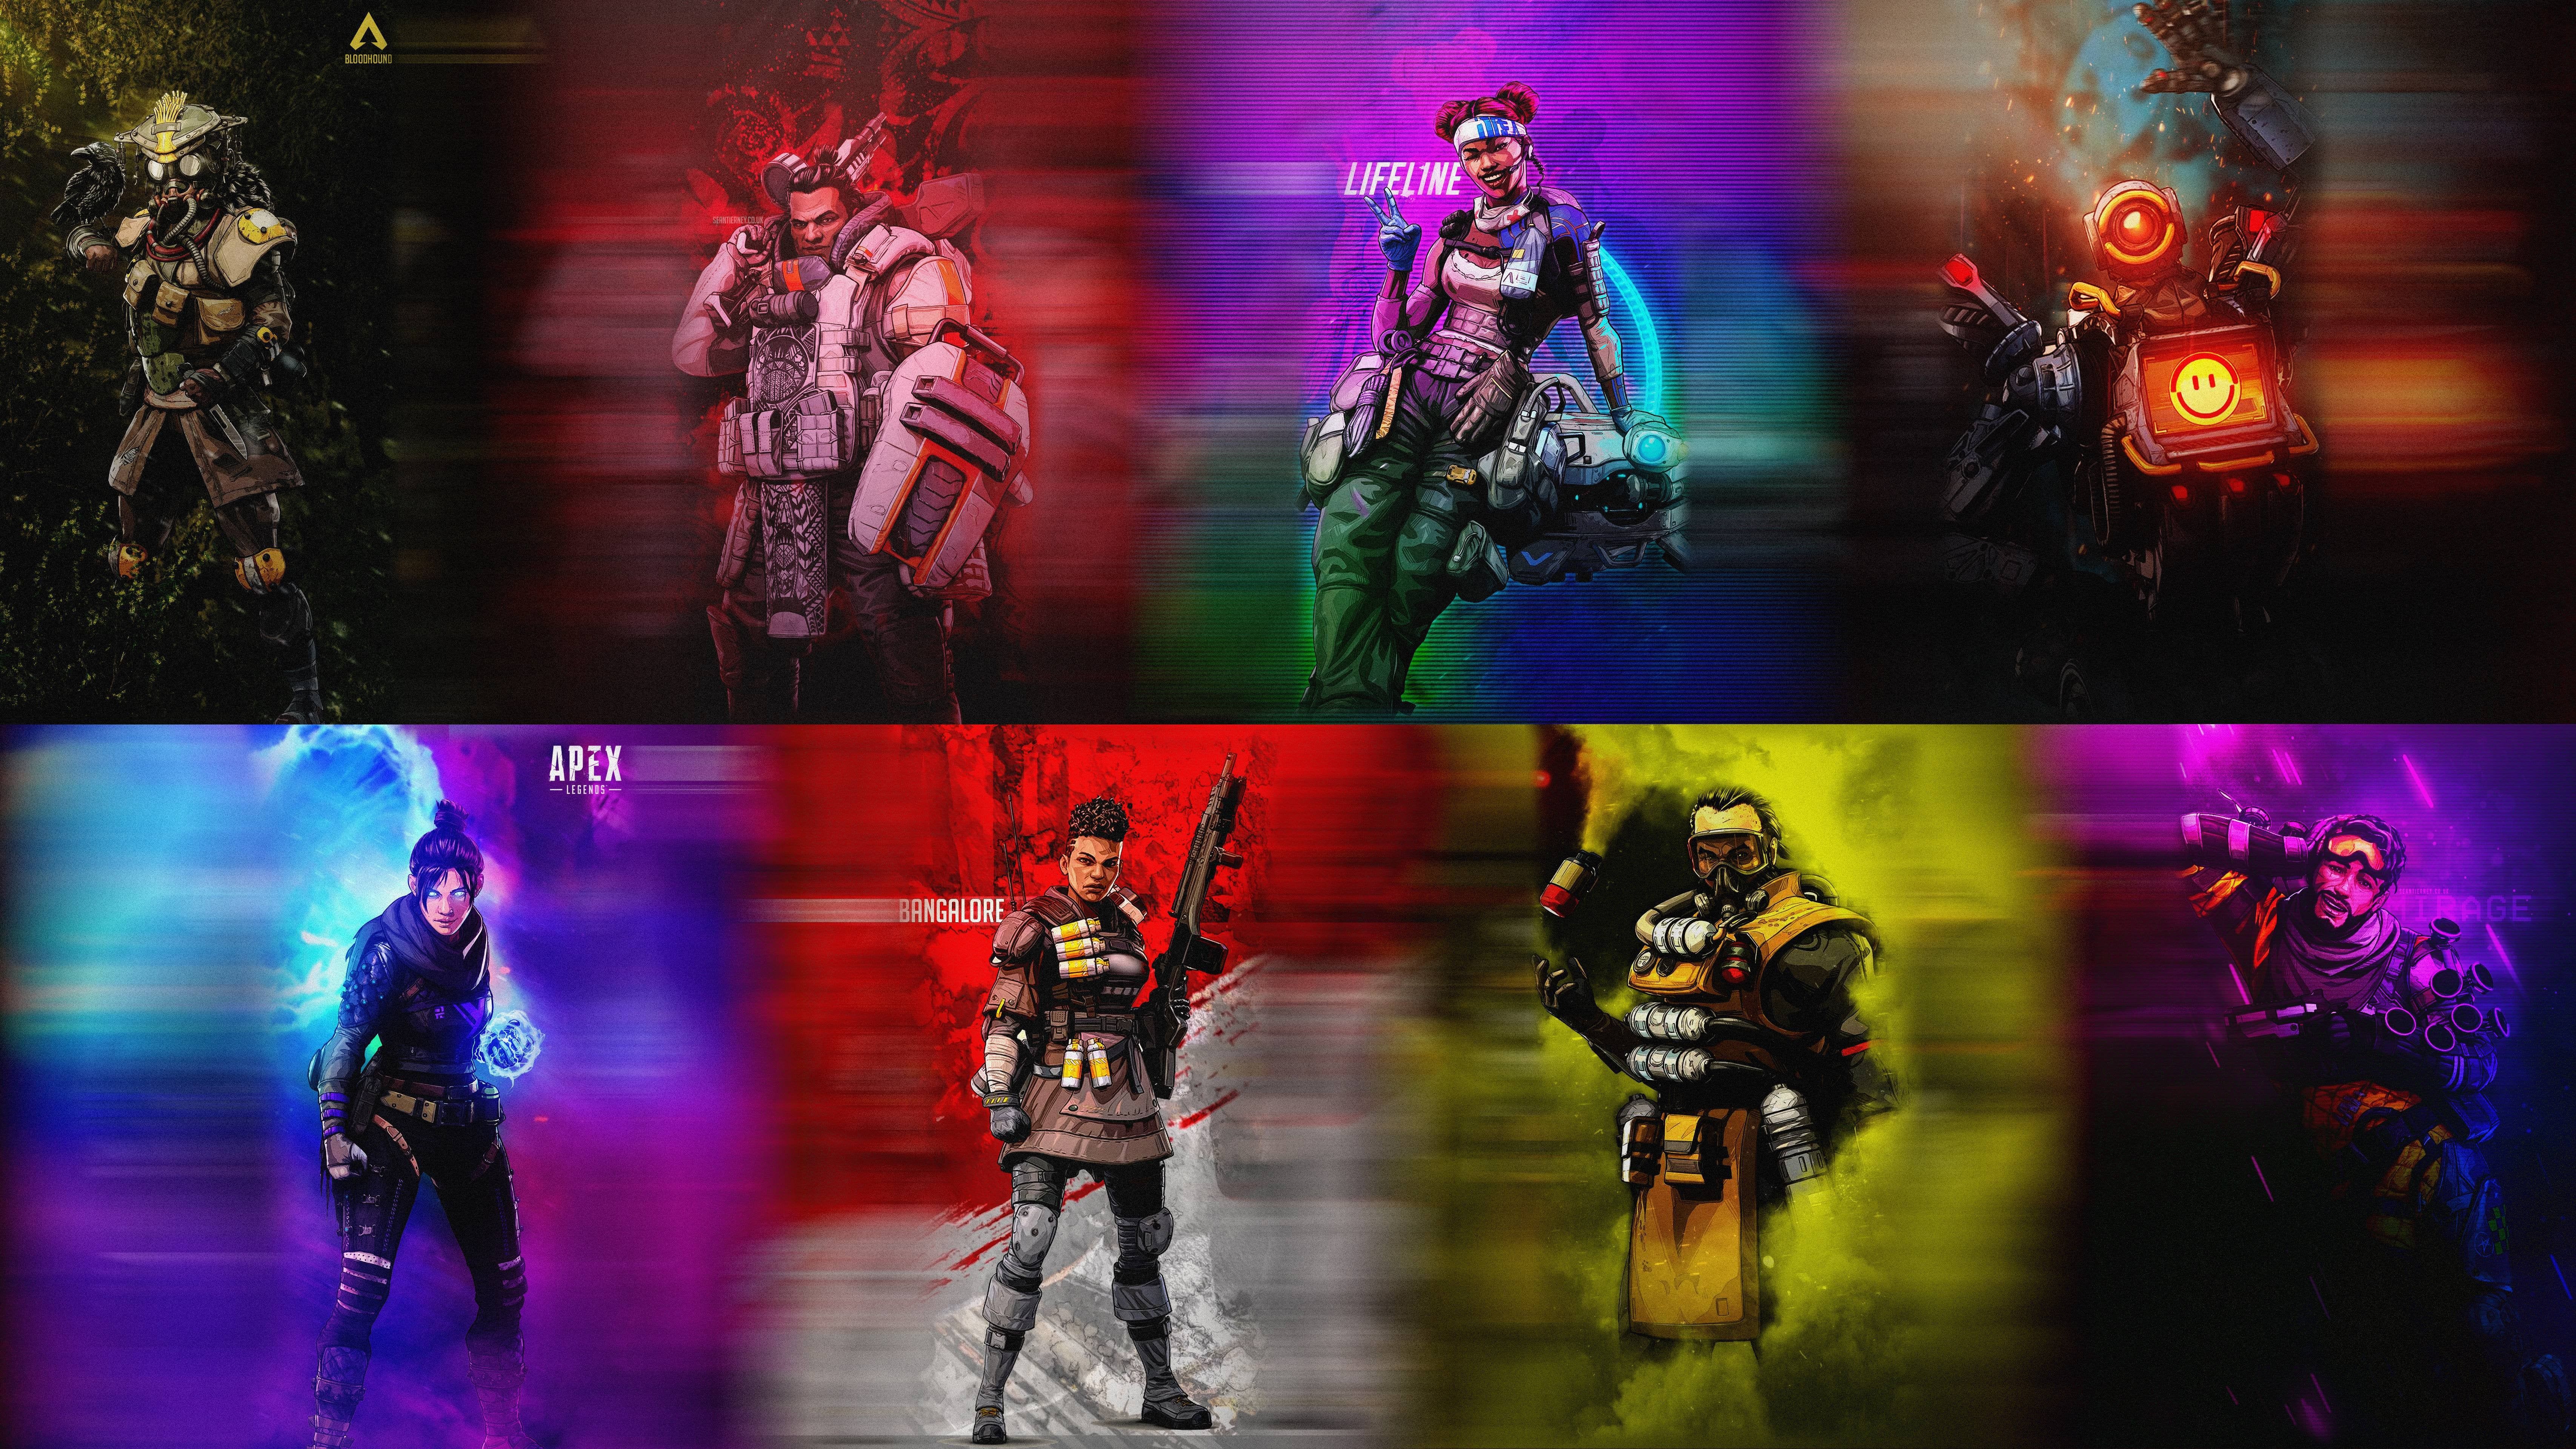 I Made This 4K Apex Legends Desktop Wallpaper (Made From U Stierney655 Mobile Papers)